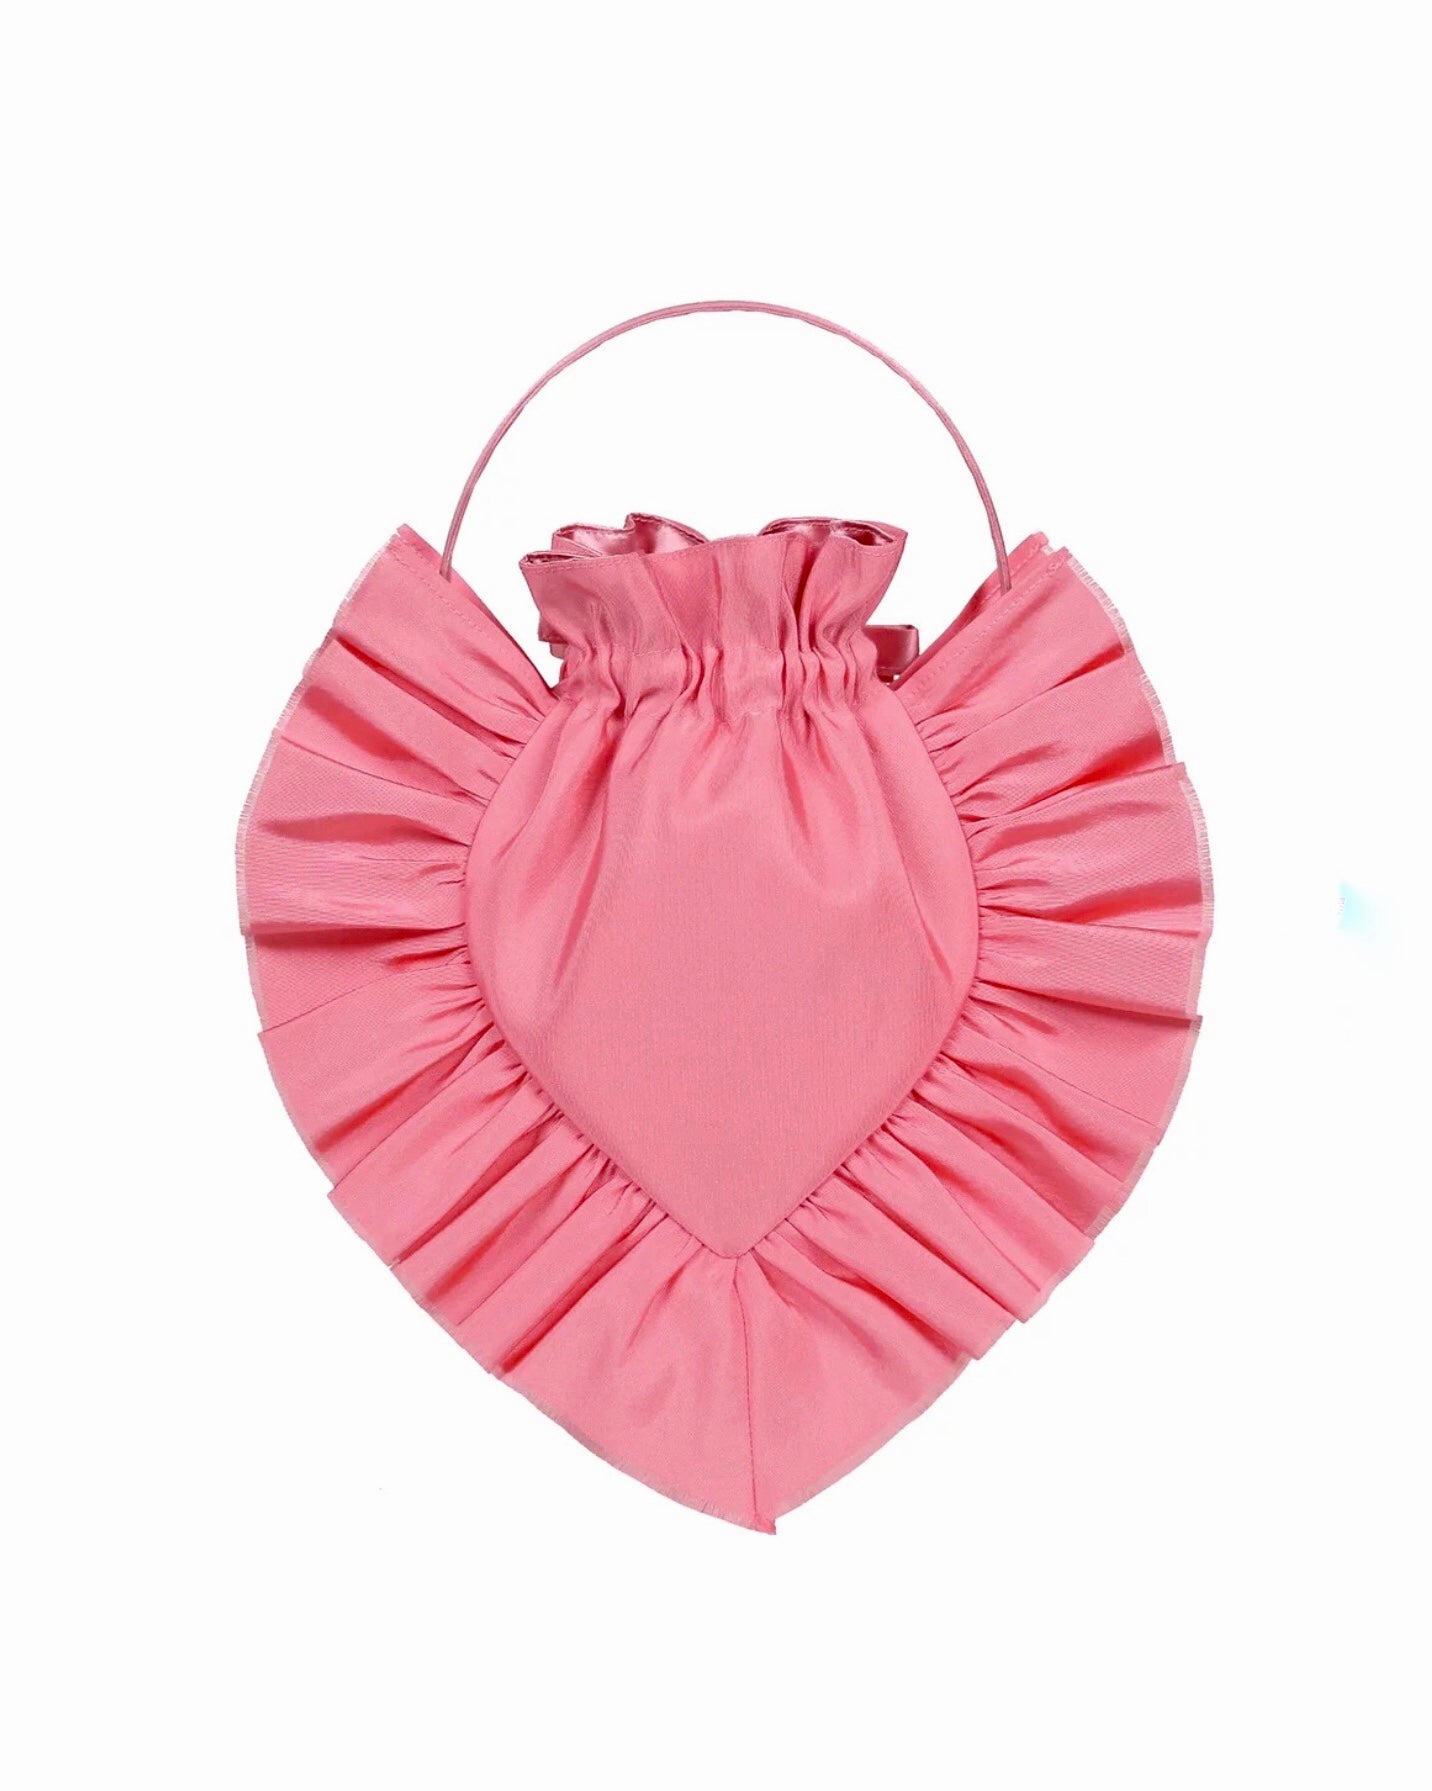 Camille Albertine Heart Shaped Diana Bag in Pink Silk and Satin